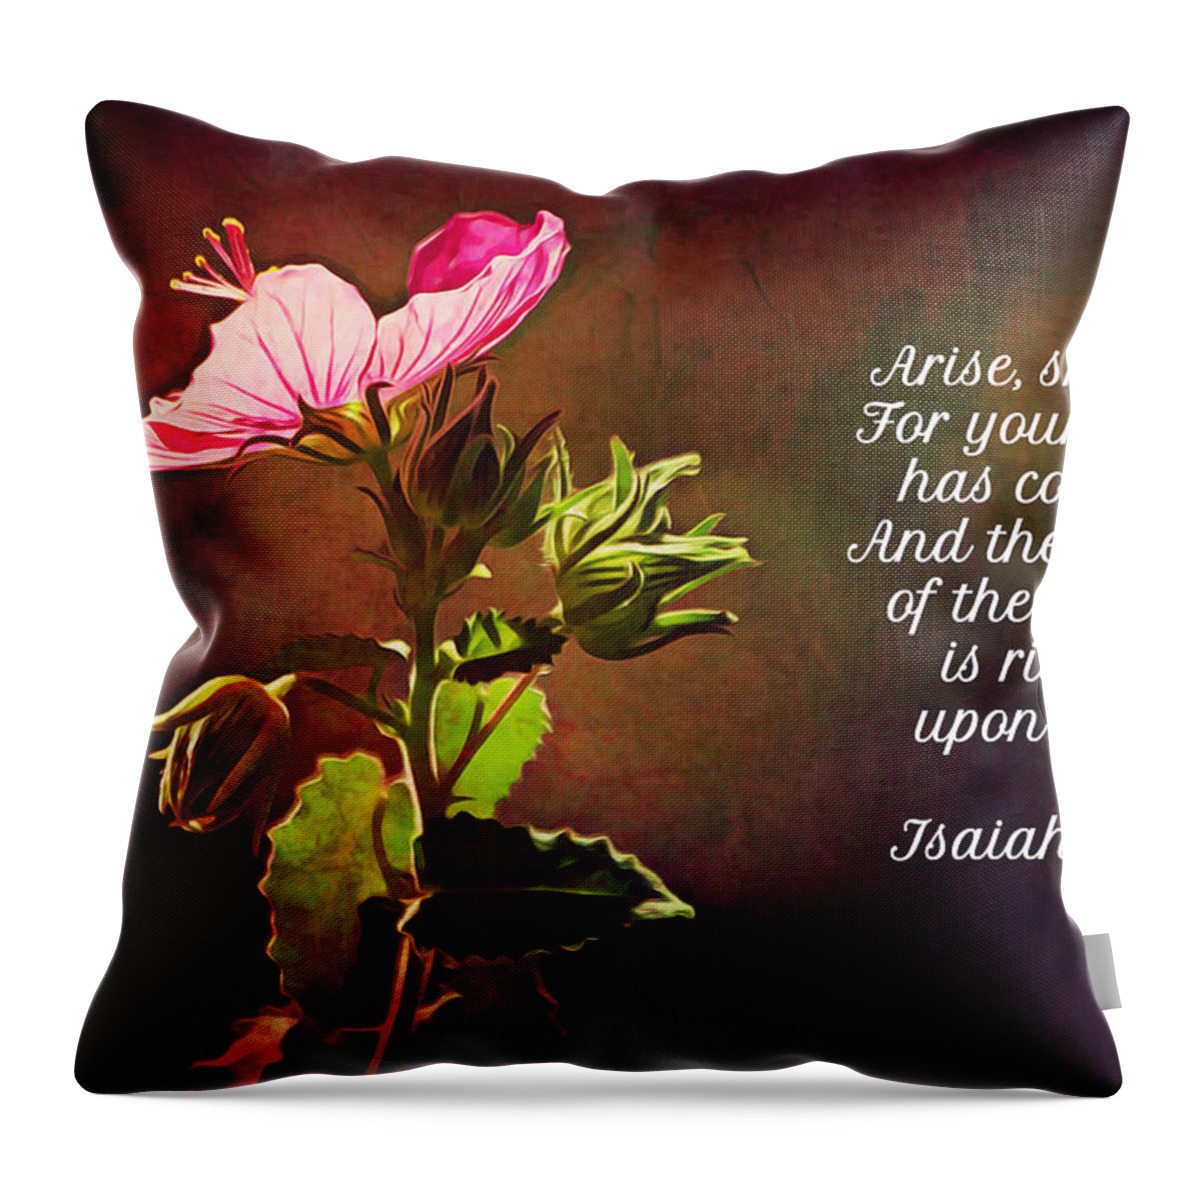 Flower Throw Pillow featuring the digital art Rock Rose Lighted and Scripture by Gaby Ethington